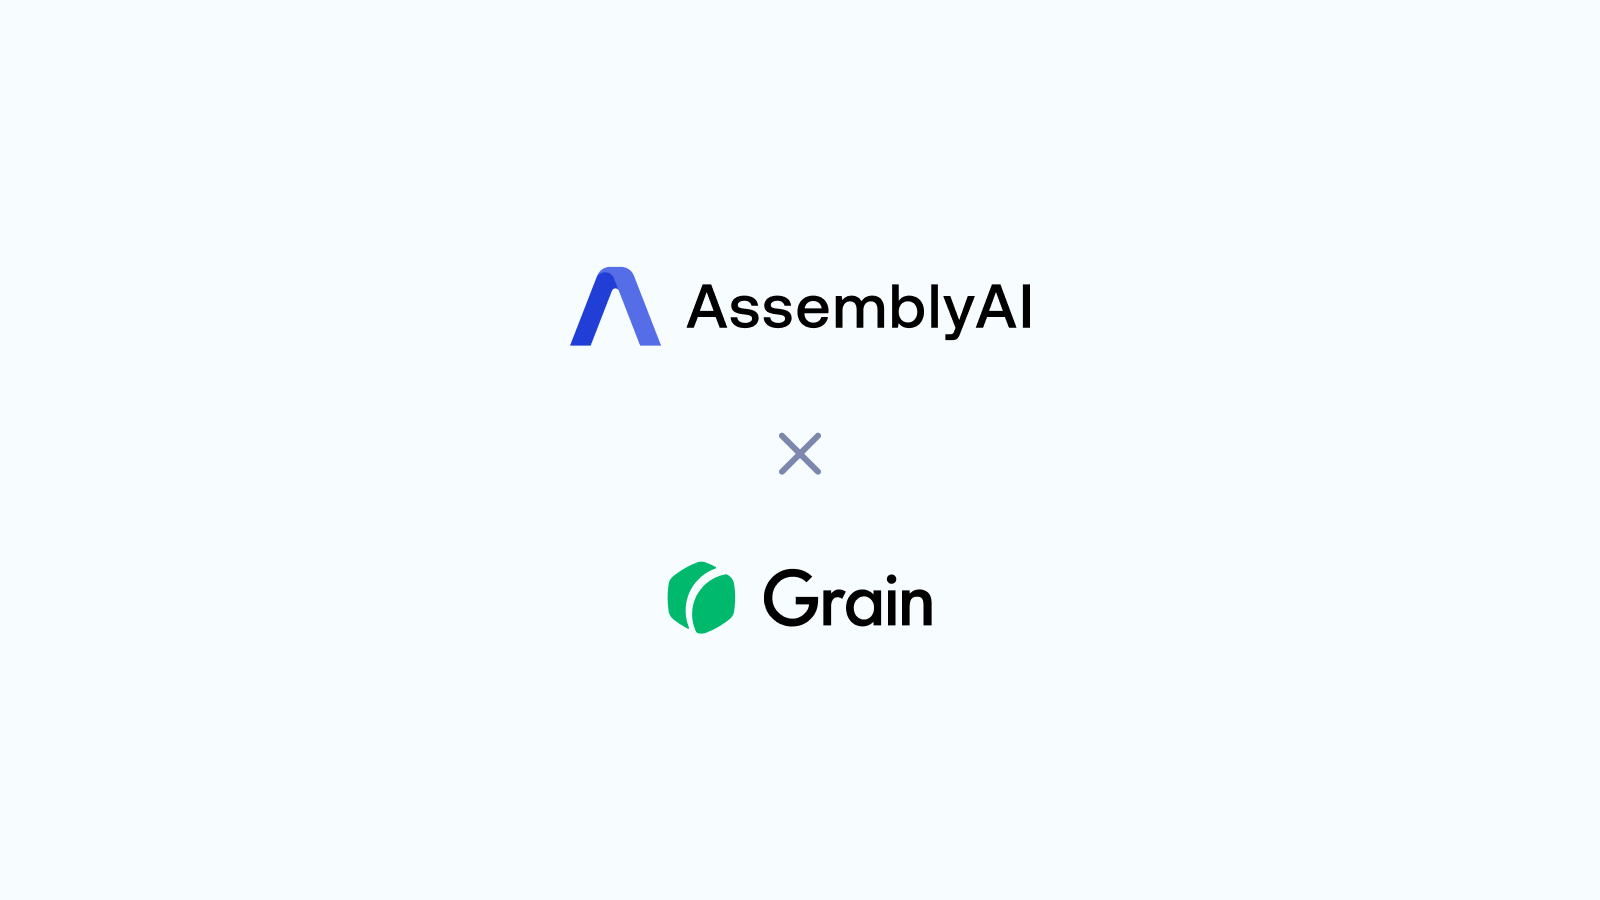 How Grain builds with AI to generate powerful insights from customer meetings